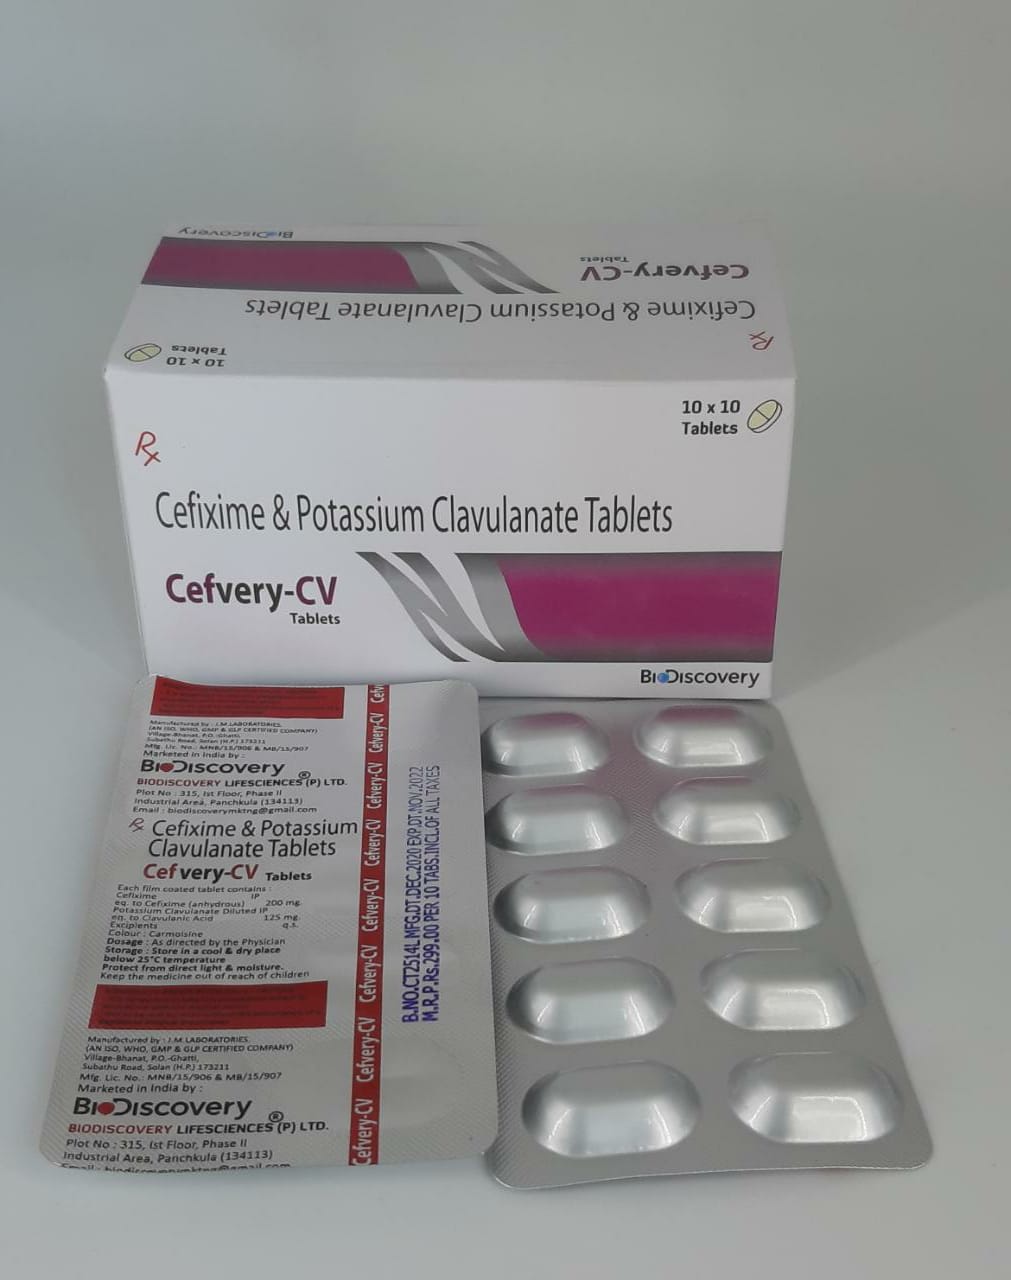 Product Name: Cefvery CV, Compositions of Cefvery CV are Cefixime & Potassium Clavulanate Tablets - Biodiscovery Lifesciences Pvt Ltd